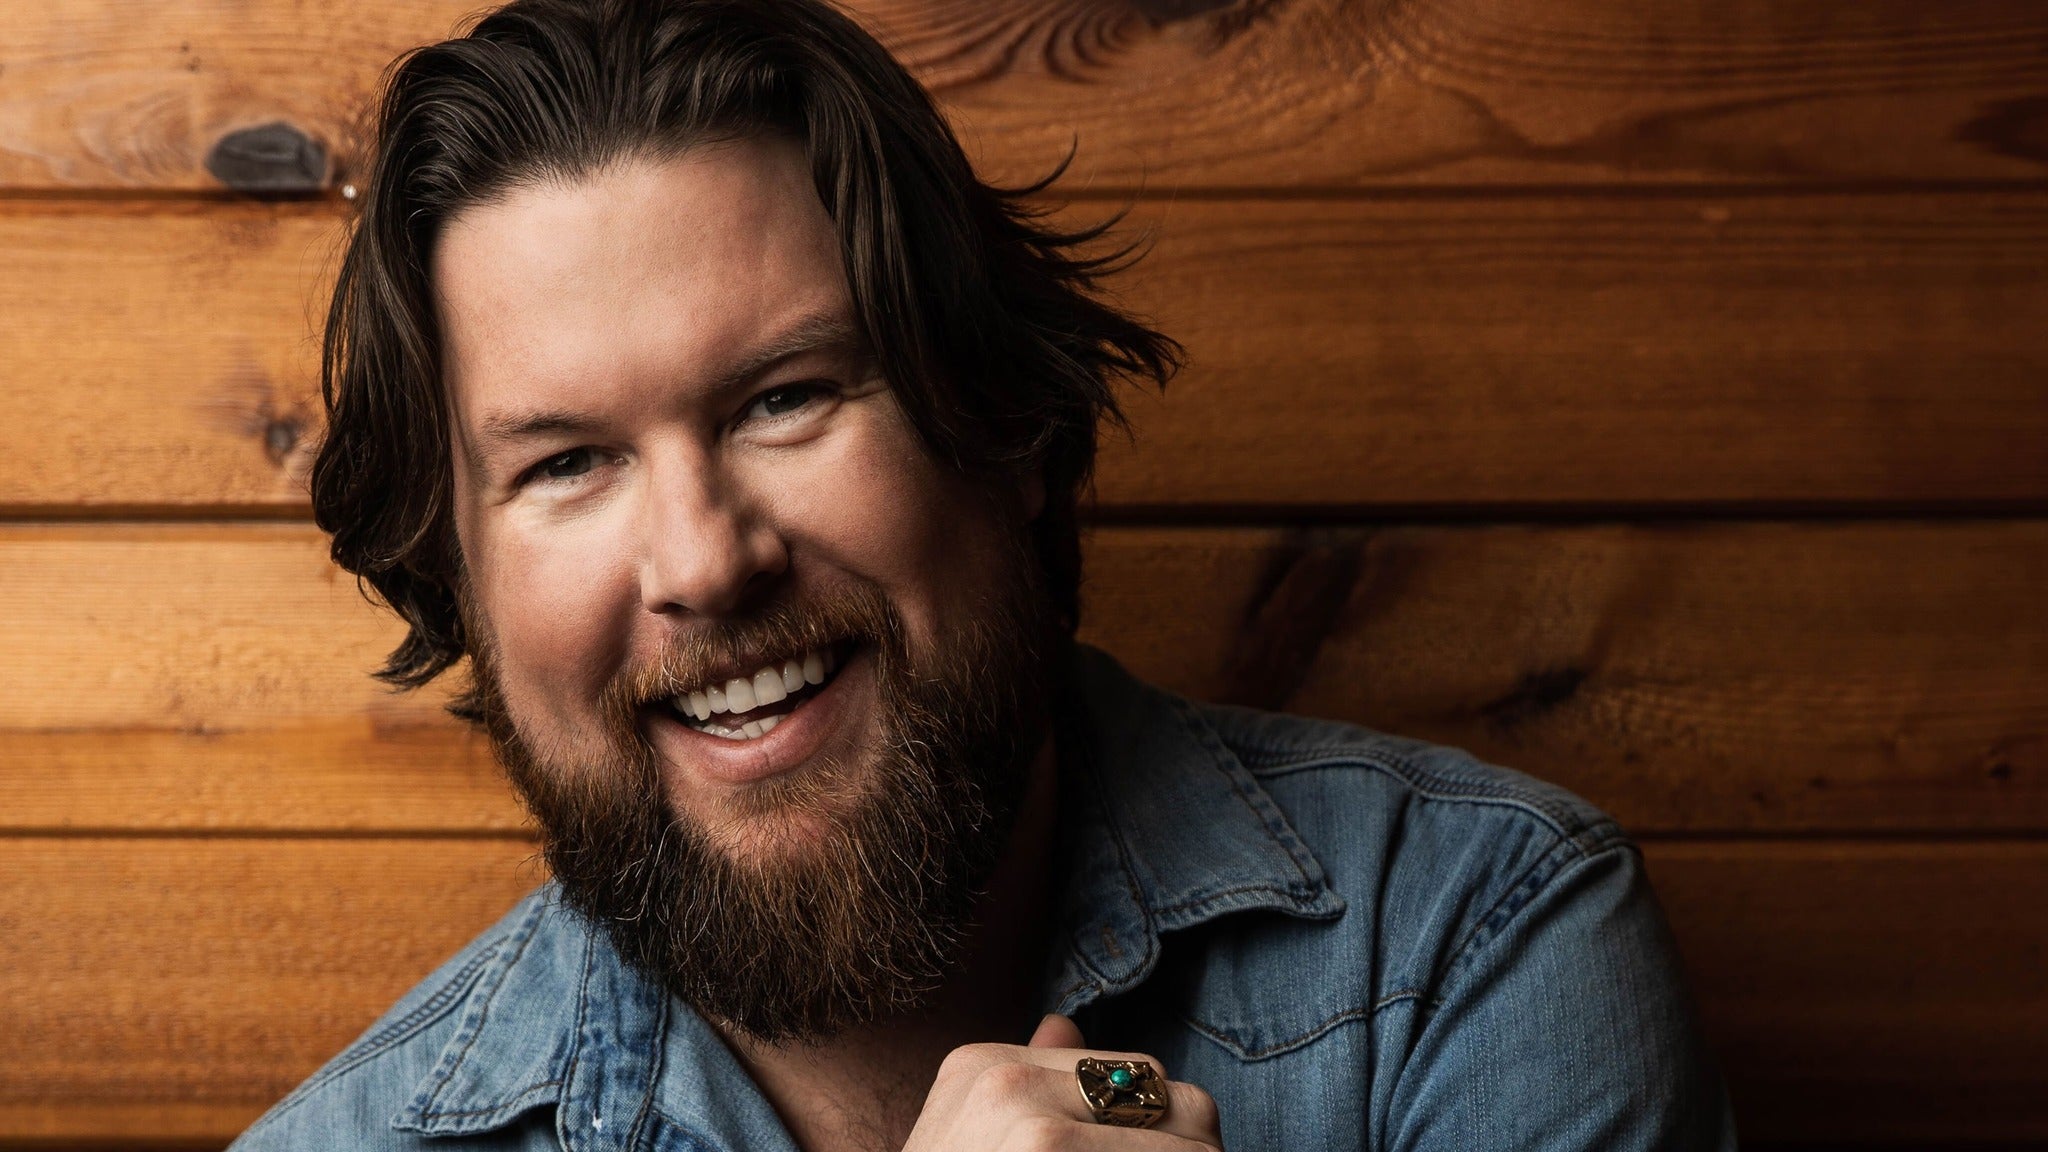 ZACH WILLIAMS FALL '22 Tour at Uptown Theater